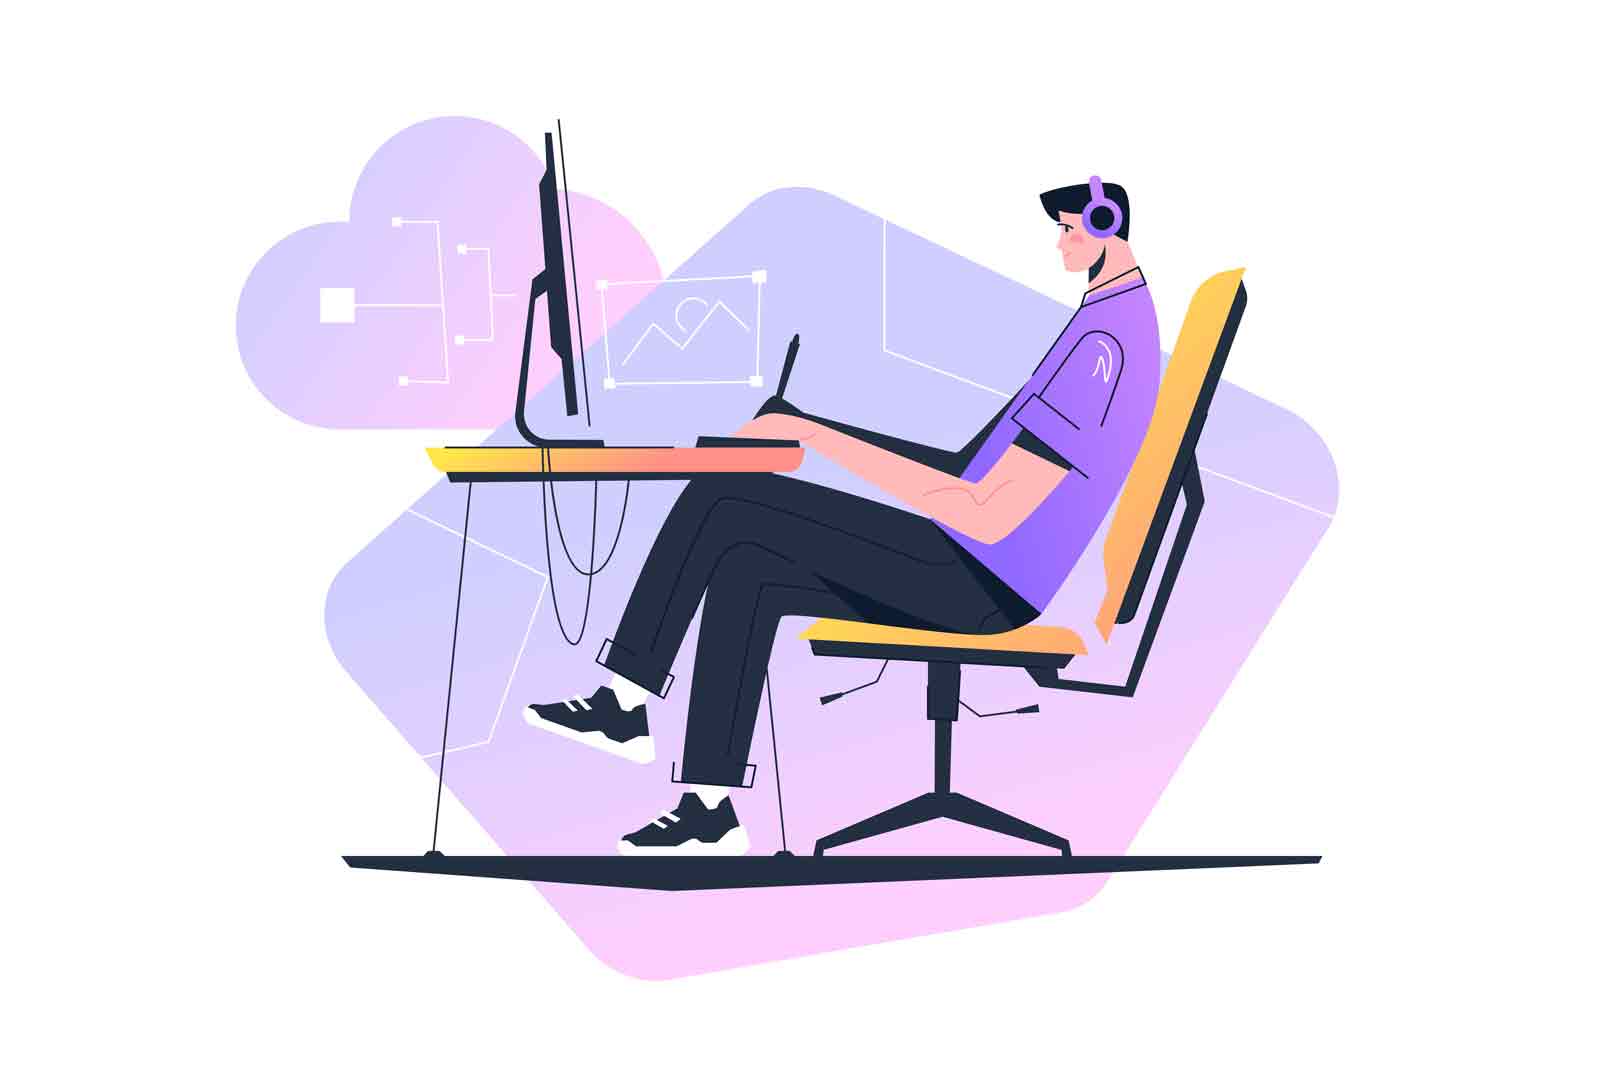 Digital designer working on laptop at workplace vector illustration. Man working at project flat style concept. Freelancing idea